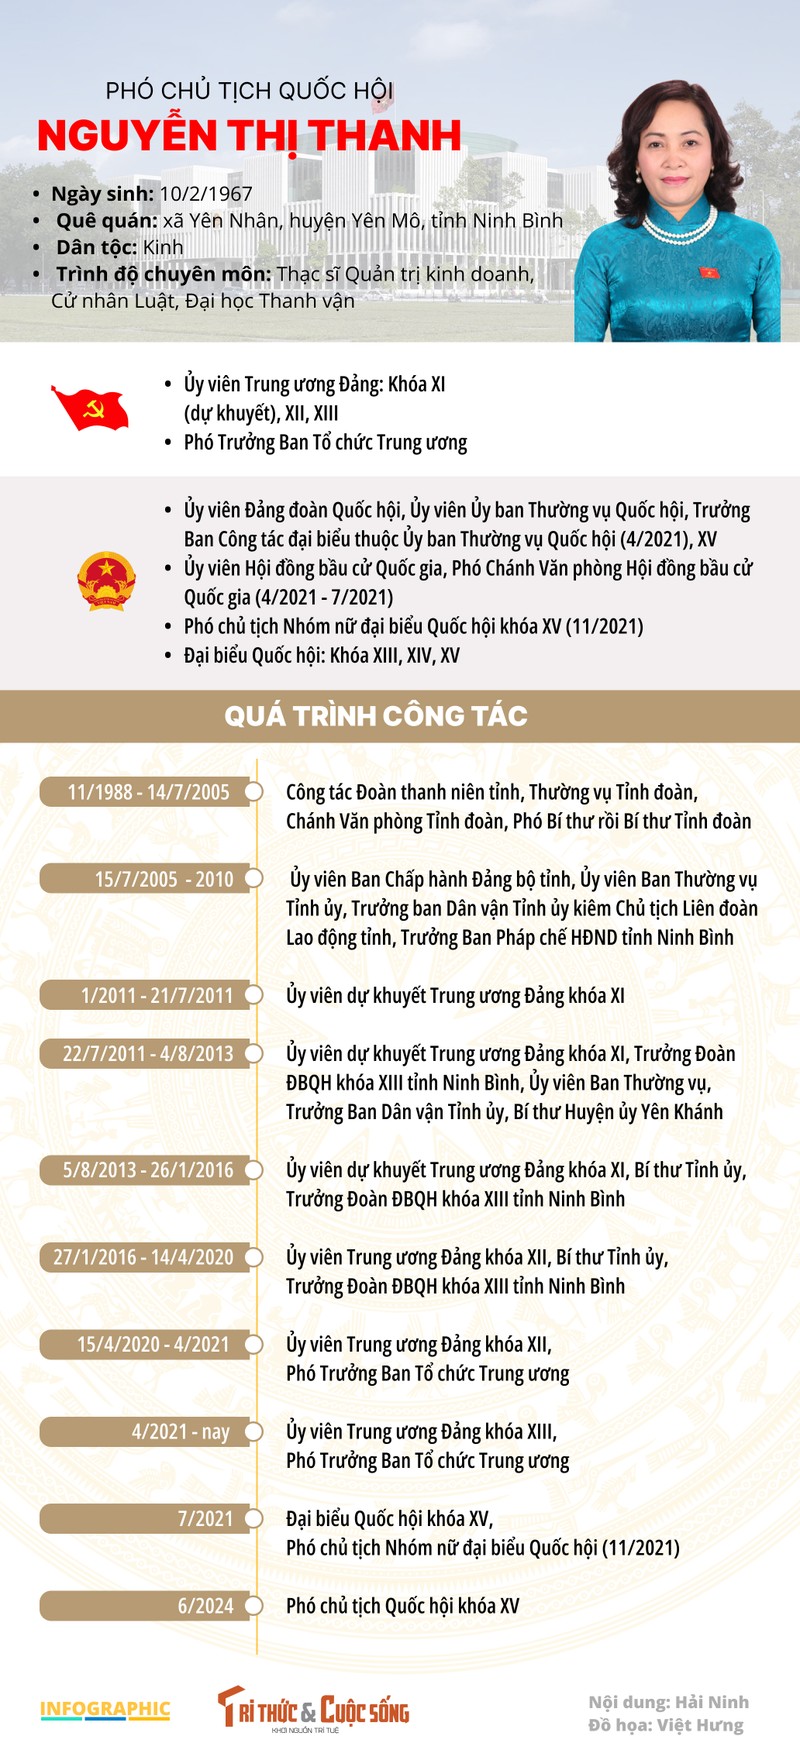 [INFOGRAPHIC] Pho chu tich Quoc hoi Nguyen Thi Thanh